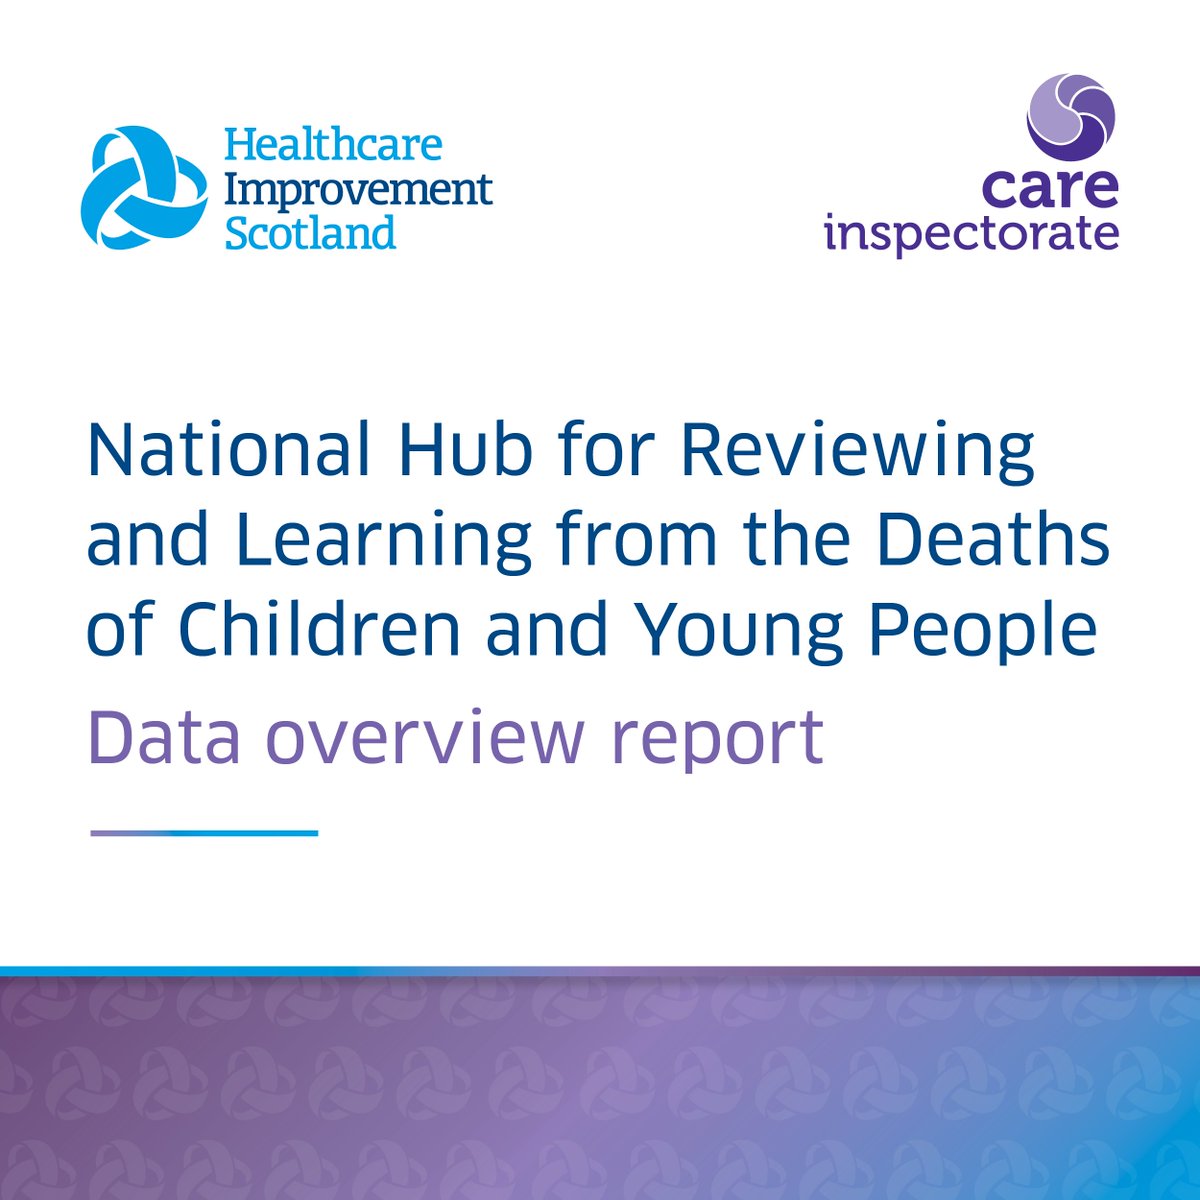 The National Hub has published its first data overview report summarising data on child deaths and child death reviews in Scotland. It makes five recommendations. The link to read the report is in the comments. #CDRNationalHub